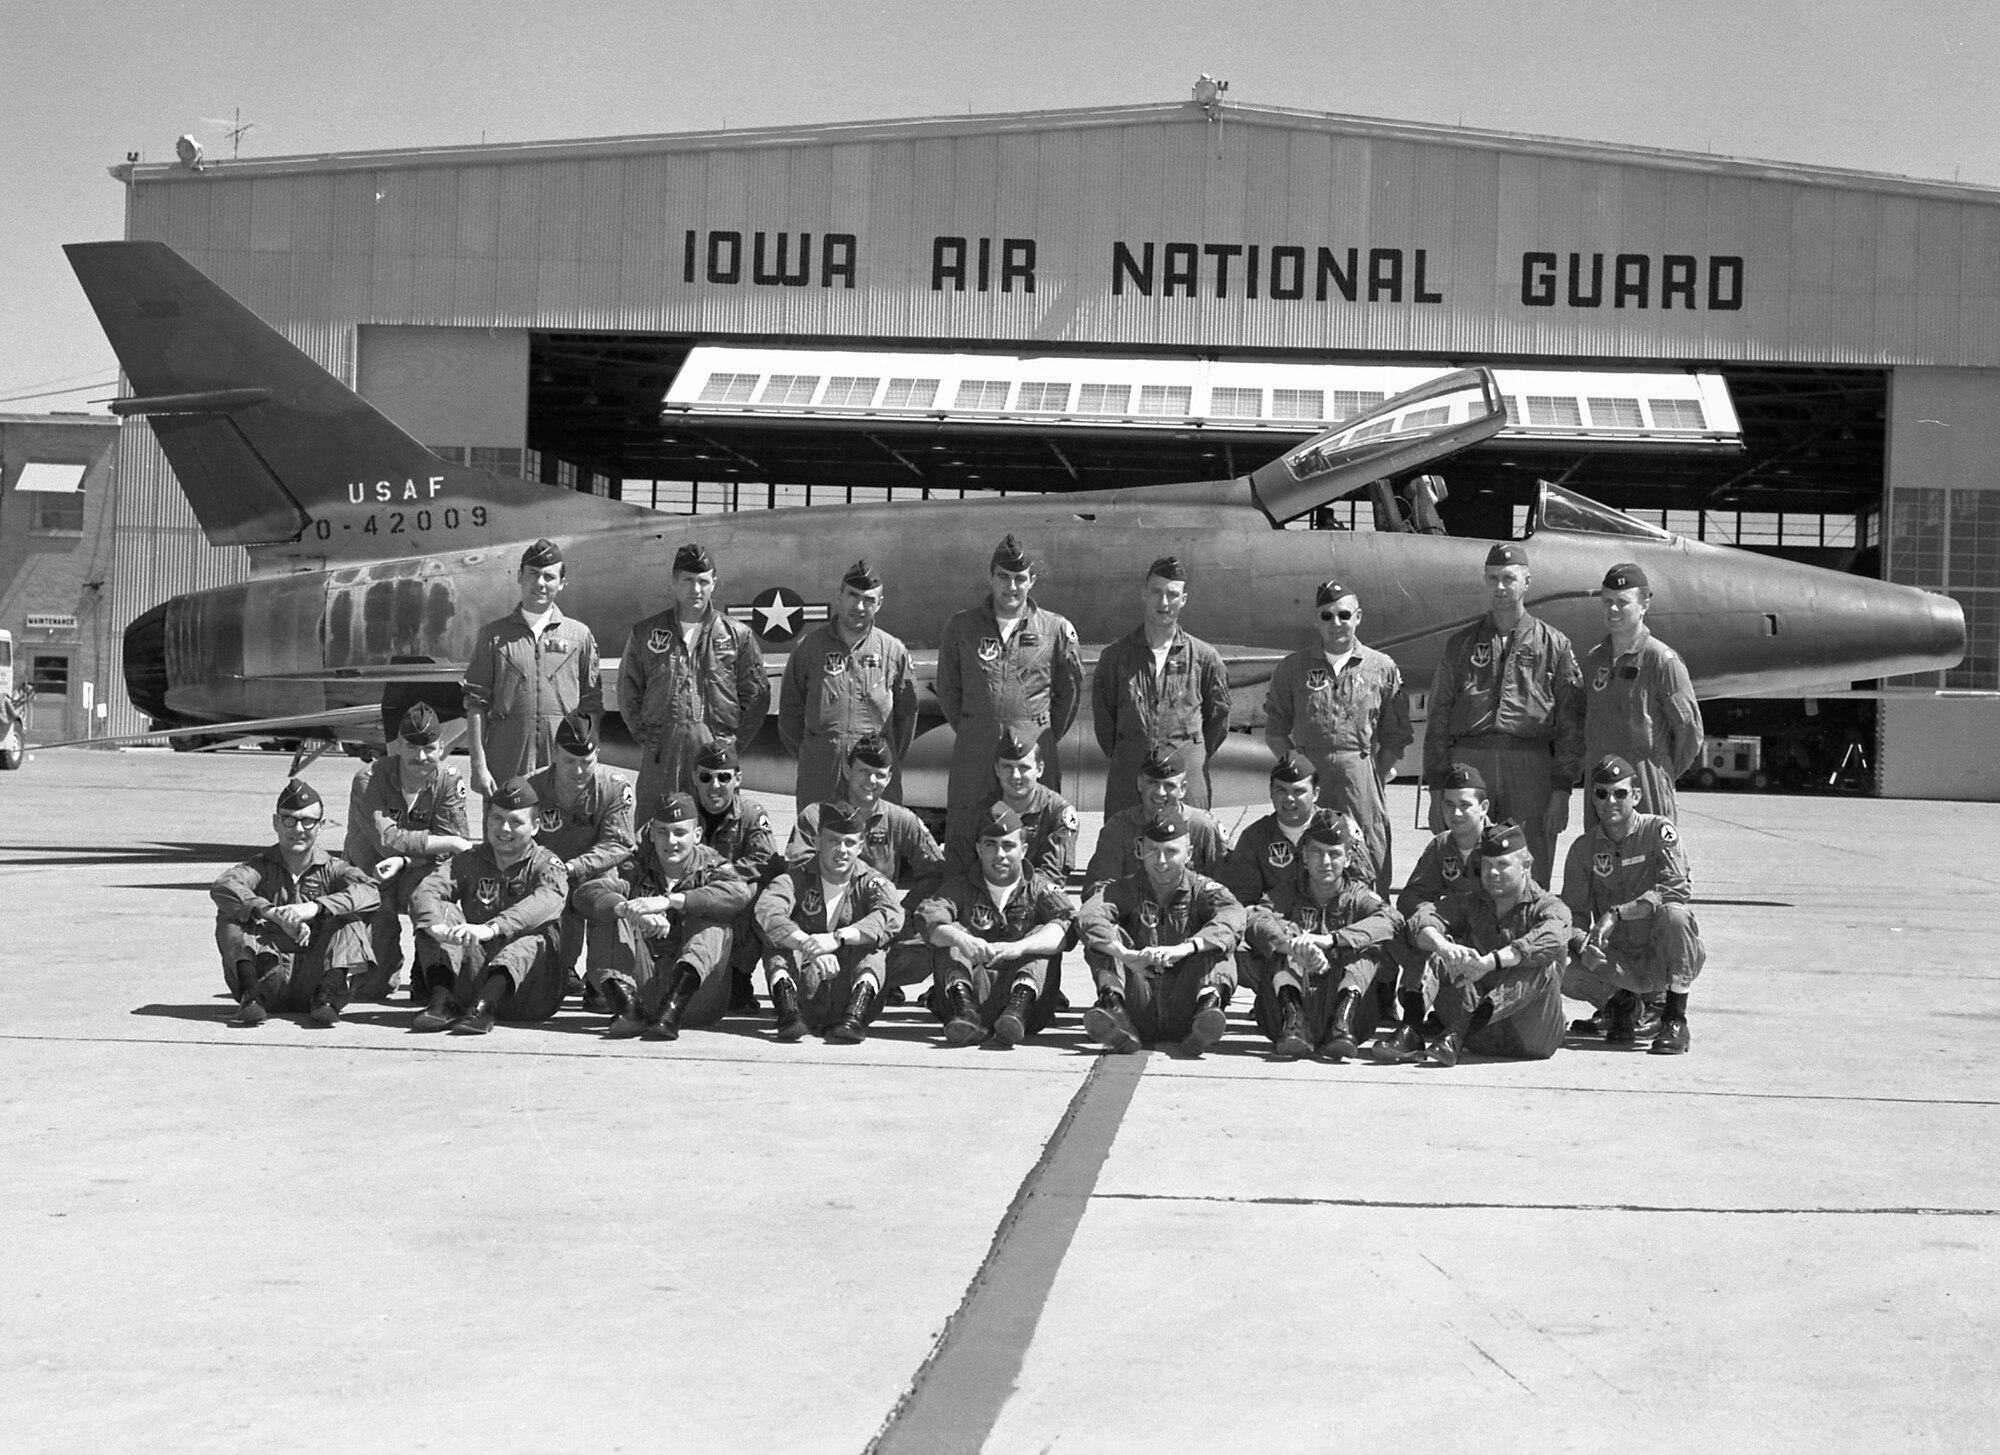 April 29, 1968 Sioux City, Iowa LT Warren Brown, front row 2nd from the right.
On 14 July 1968, 1st Lt Warren K. Brown was on an air strike mission in the AShau Valley. (Vietnam) As he made his pass over the target area, his aircraft was hit by ground fire. He headed in an easterly direction and bailed out shortly afterwards as his aircraft was on fire. During the ejection, there was a chute entanglement and the pilot was found deceased in his chute harness by a helicopter crew.

The above paragraph is how the death of Sioux City native Lieutenant Warren Brown is recorded in the history books. Brown became the only pilot of the Sioux City based 185th Air National Guard to be killed in Vietnam. (The 185th Tactical Fighter Group was mobilized on January 26, 1968 and returned to Sioux City on the 14th of May 1969.)
